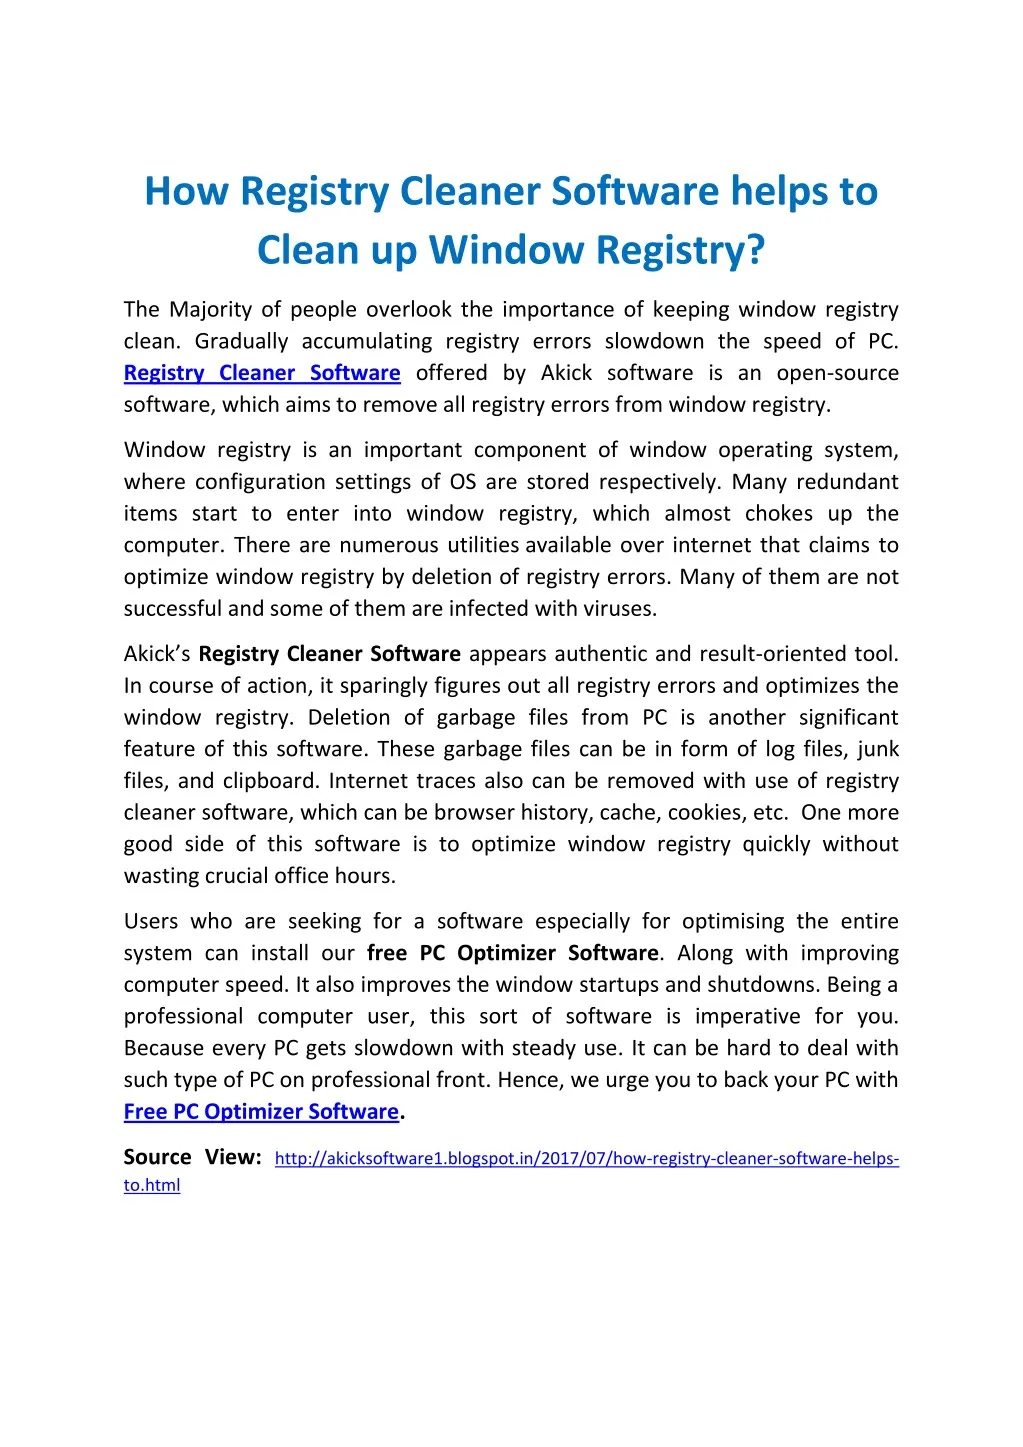 how registry cleaner software helps to clean